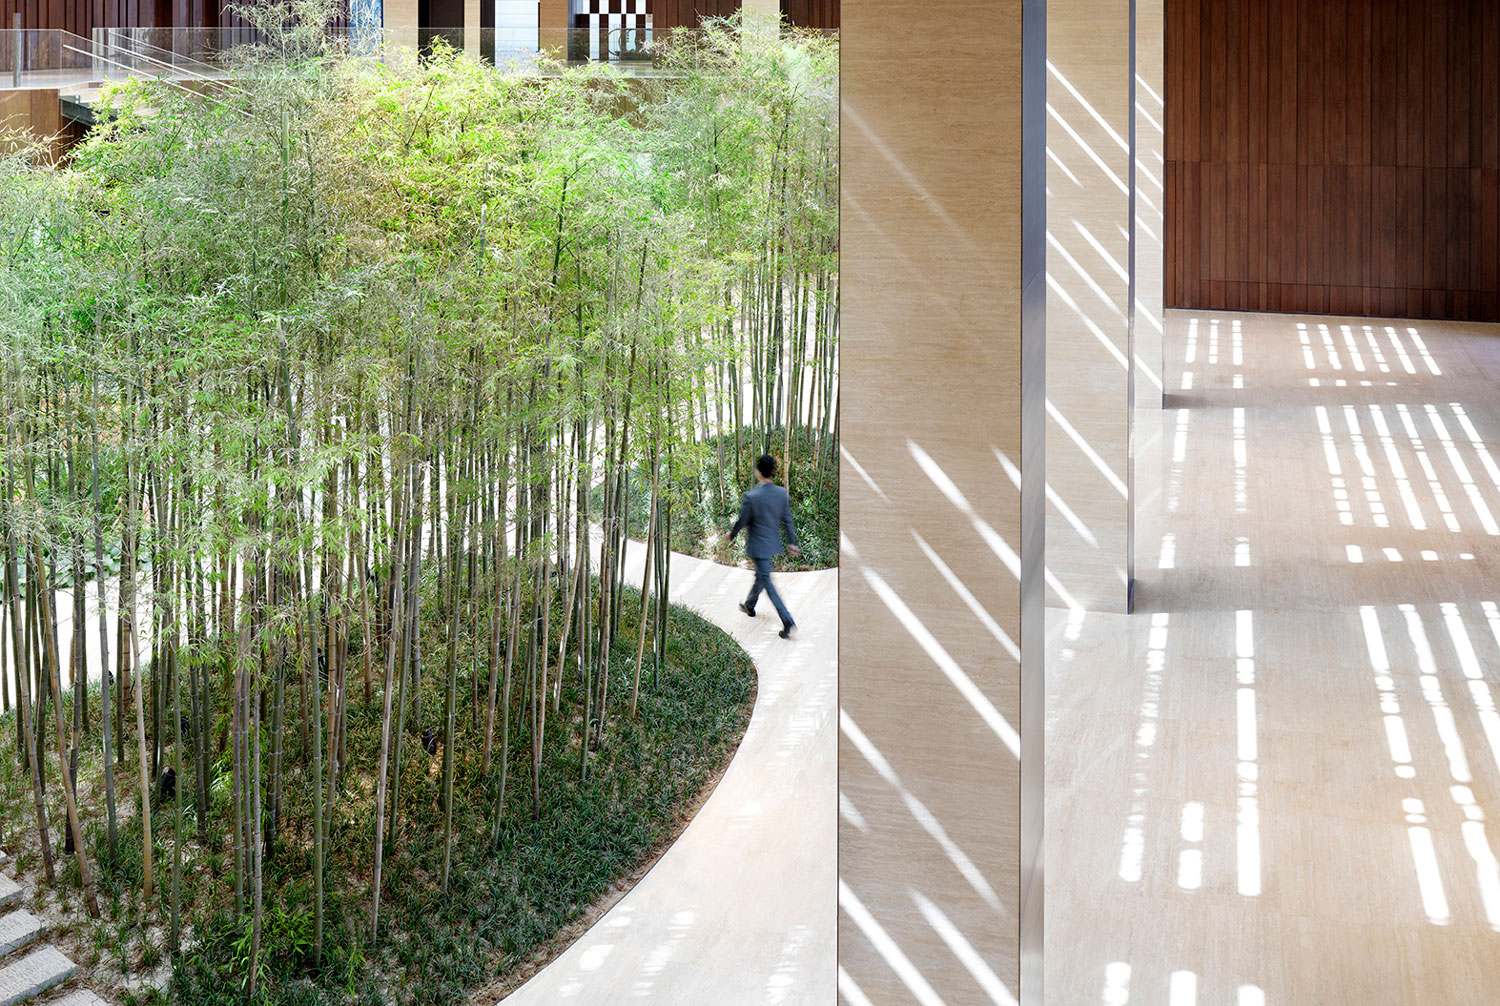 Kengo Kuma has created an urban forest defined by a contemporary chic design and natural materials as a refreshing backdrop to an intuitive hospitality experience.